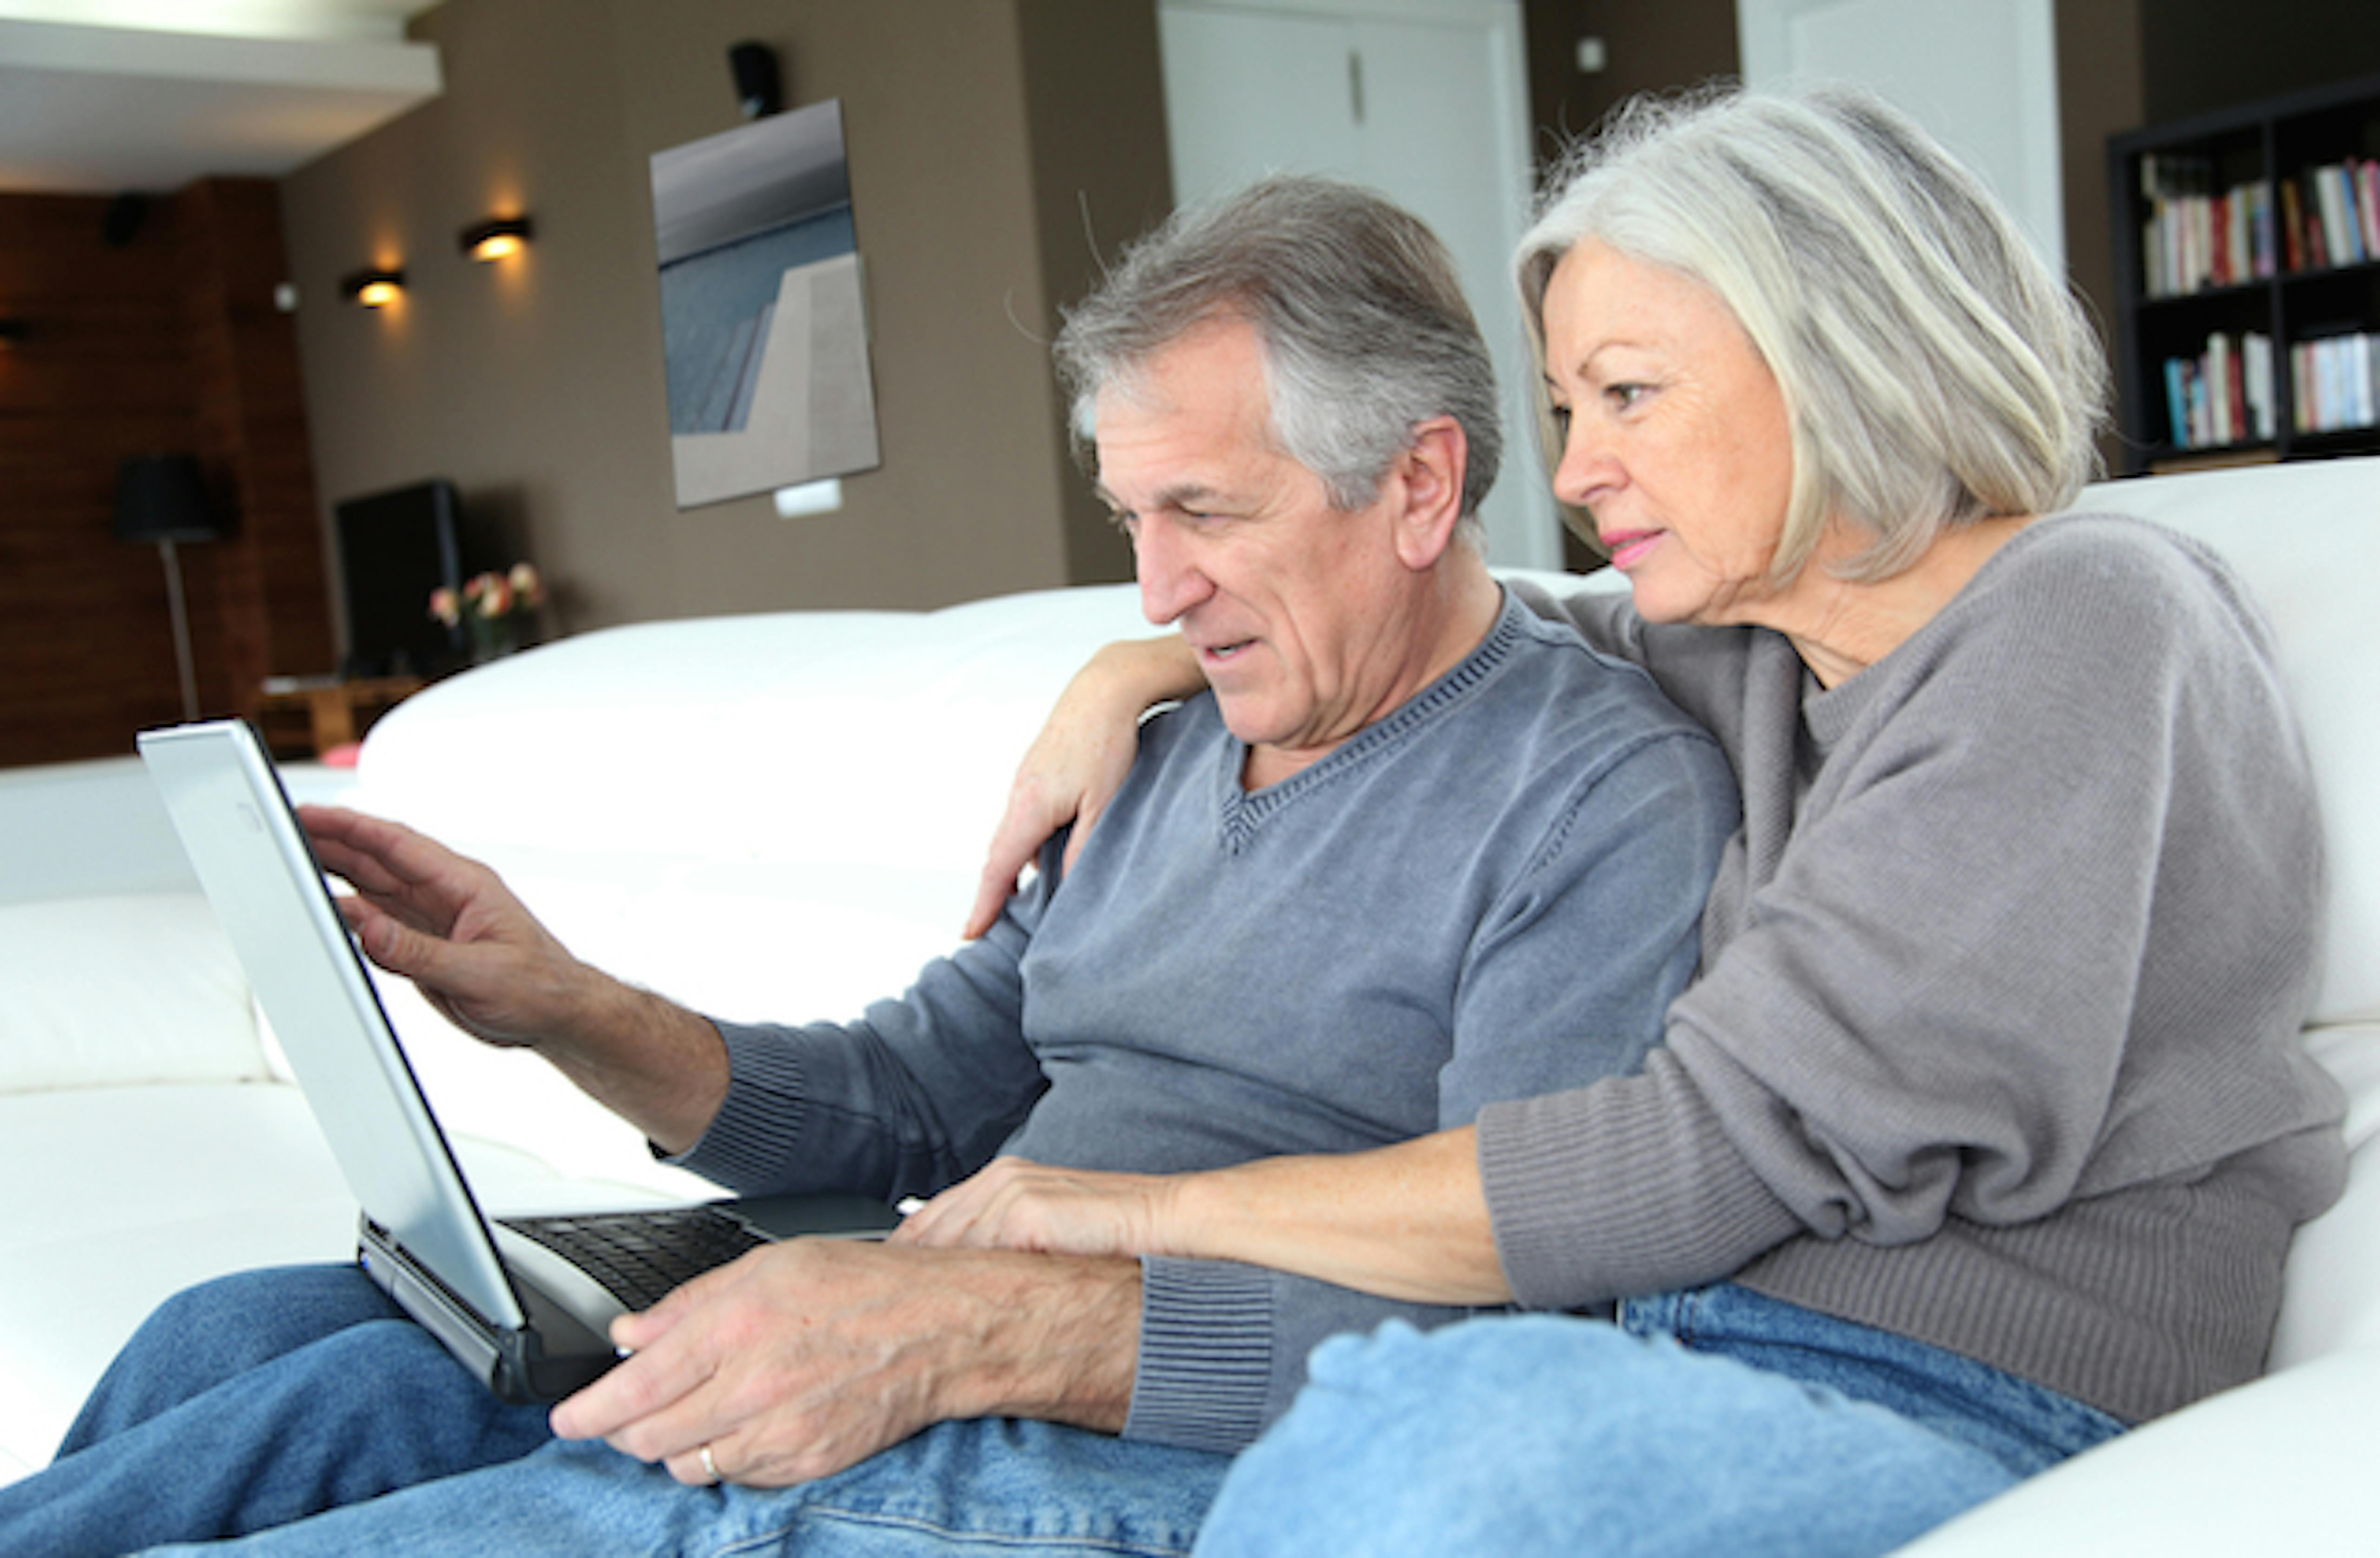 cheap house insurance for over 50s